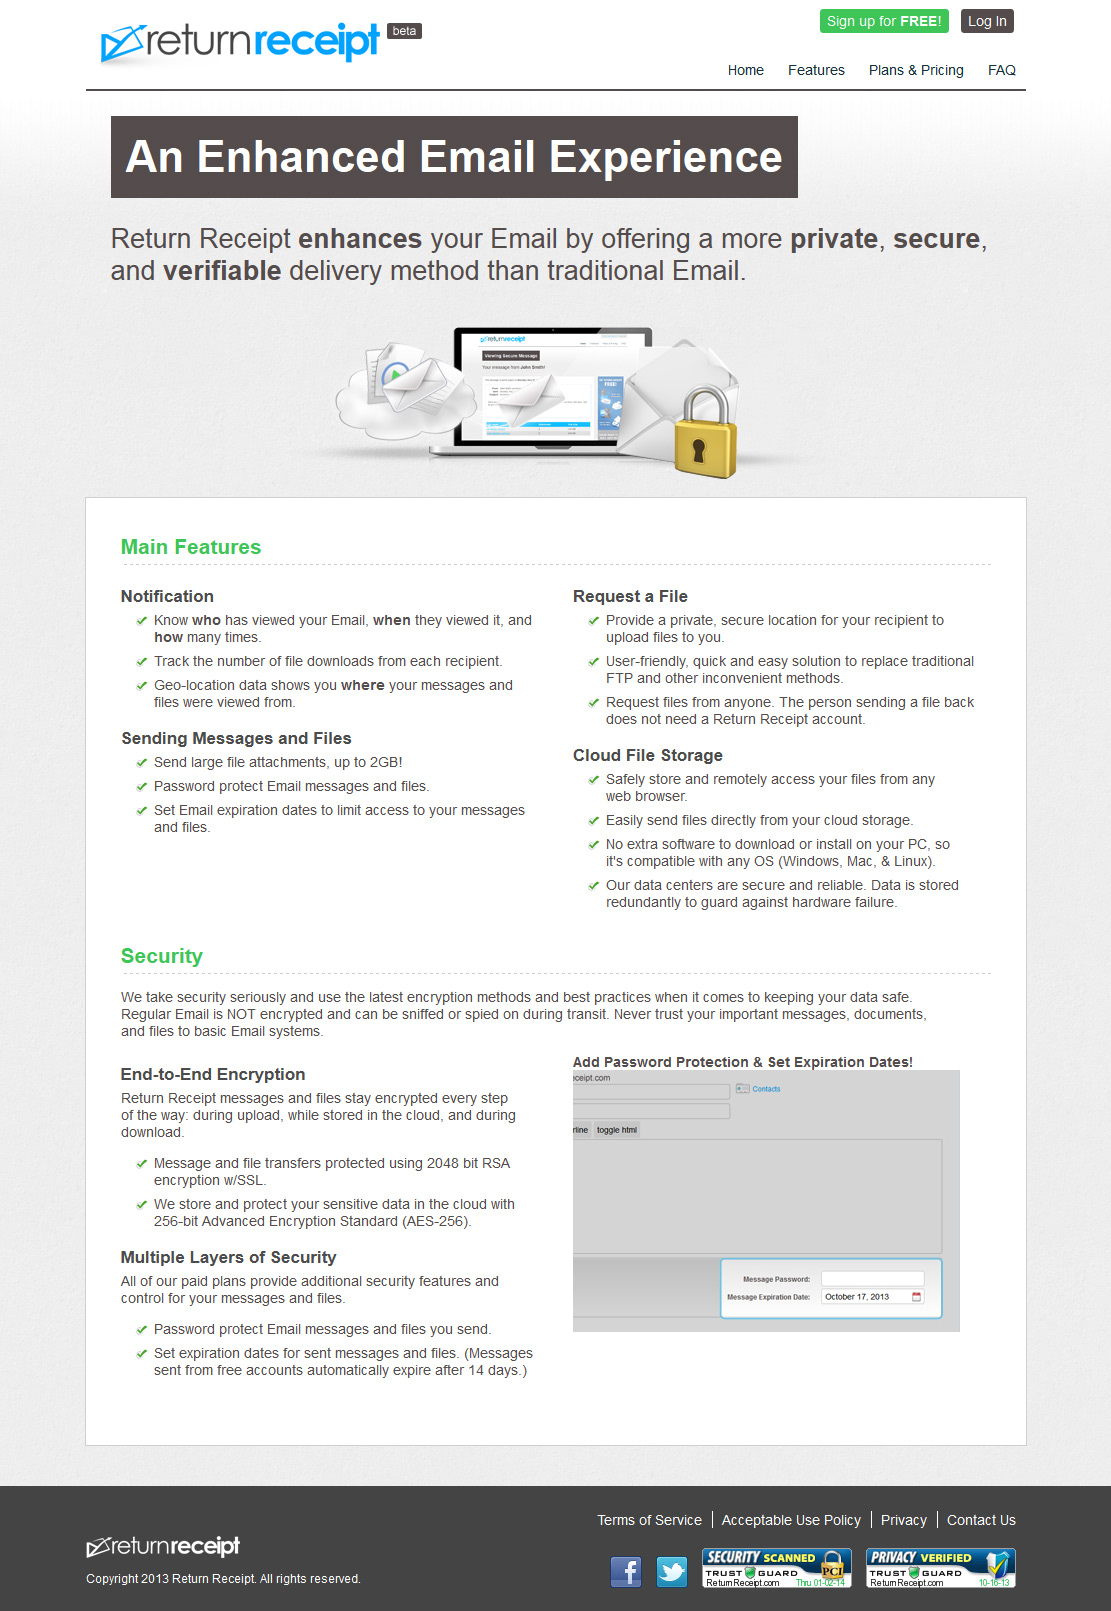 Email Delivery email notification Website web 2.0 Clean Design